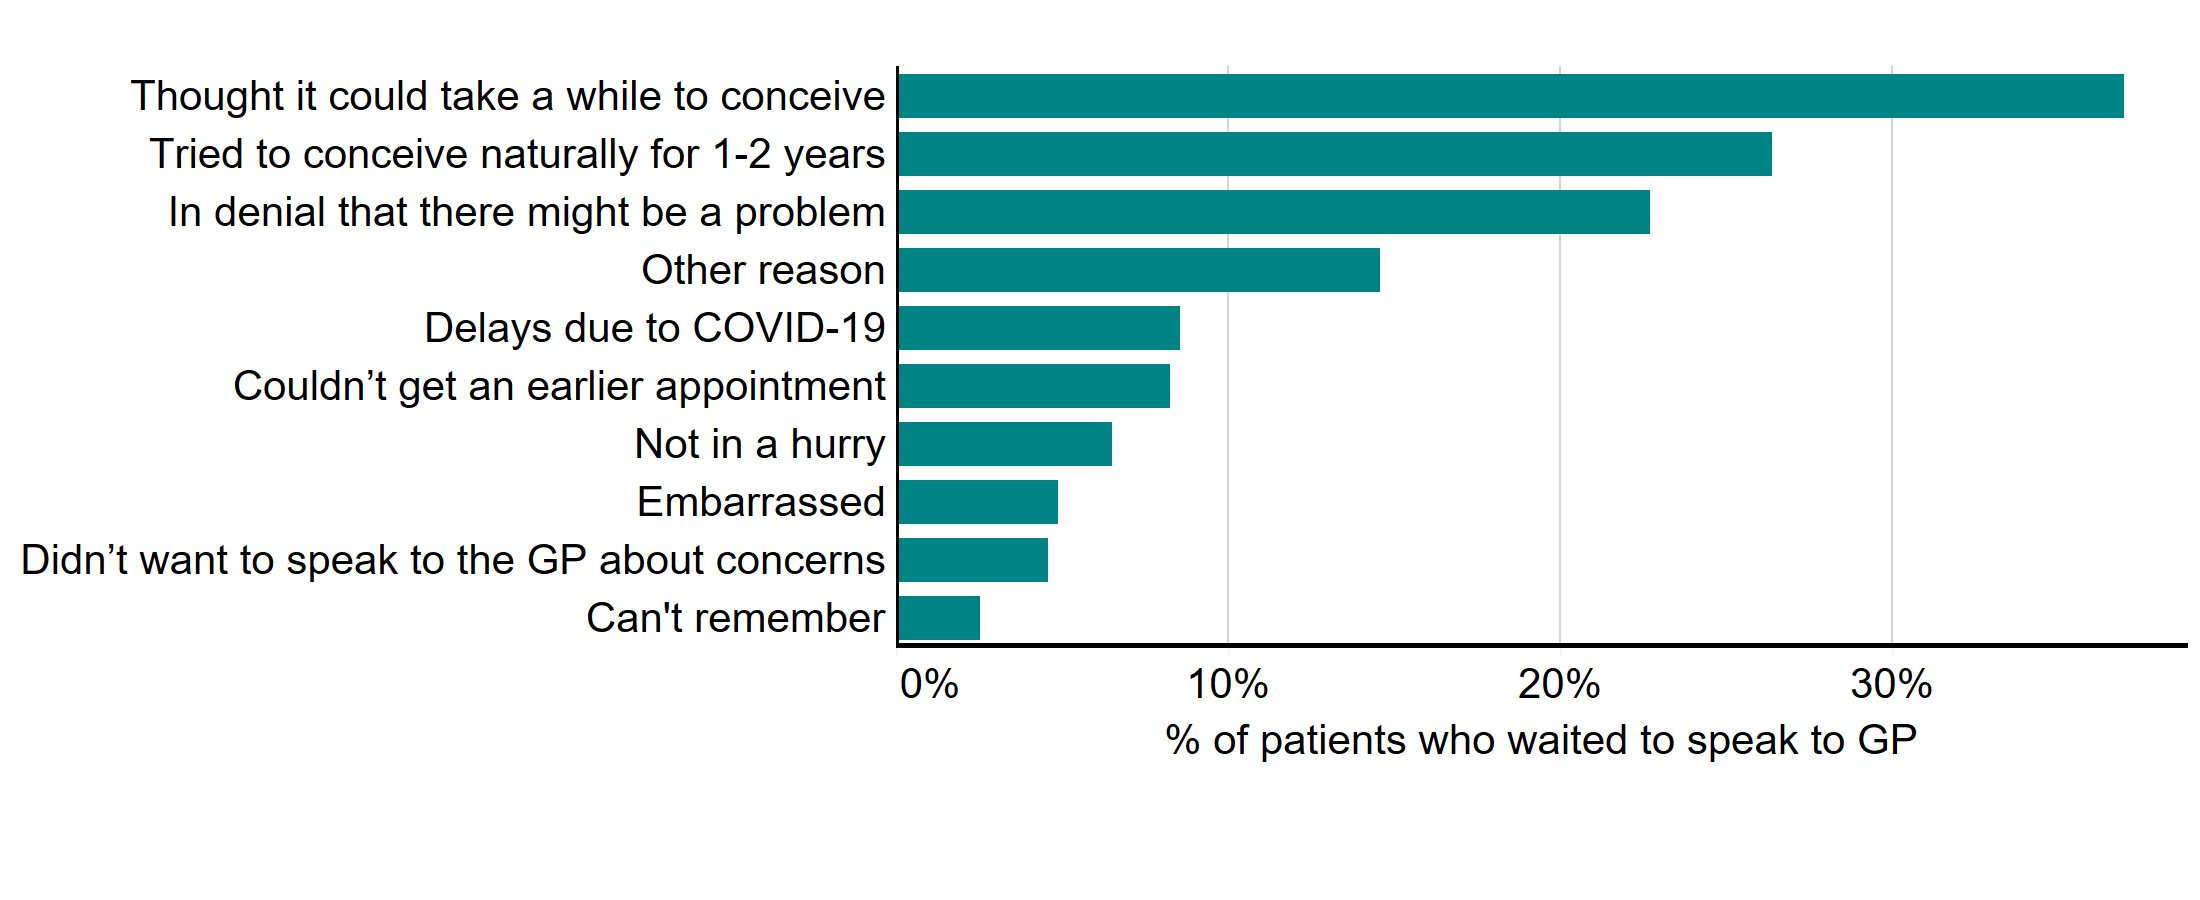 Figure 4: Reasons for wait to speak to a GP about fertility concerns. Reasons for wait to speak to a GP about fertility concerns, 2021. This bar chart shows the reasons why patients waited to speak to a GP about their fertility concerns. The most common reason for waiting to speak to a GP was that they thought it could take a while to conceive (37%), followed by trying to conceive naturally for 1-2 years (26%). An accessible form of the underlying data for this figure can be downloaded at the start of the report in .xls format.